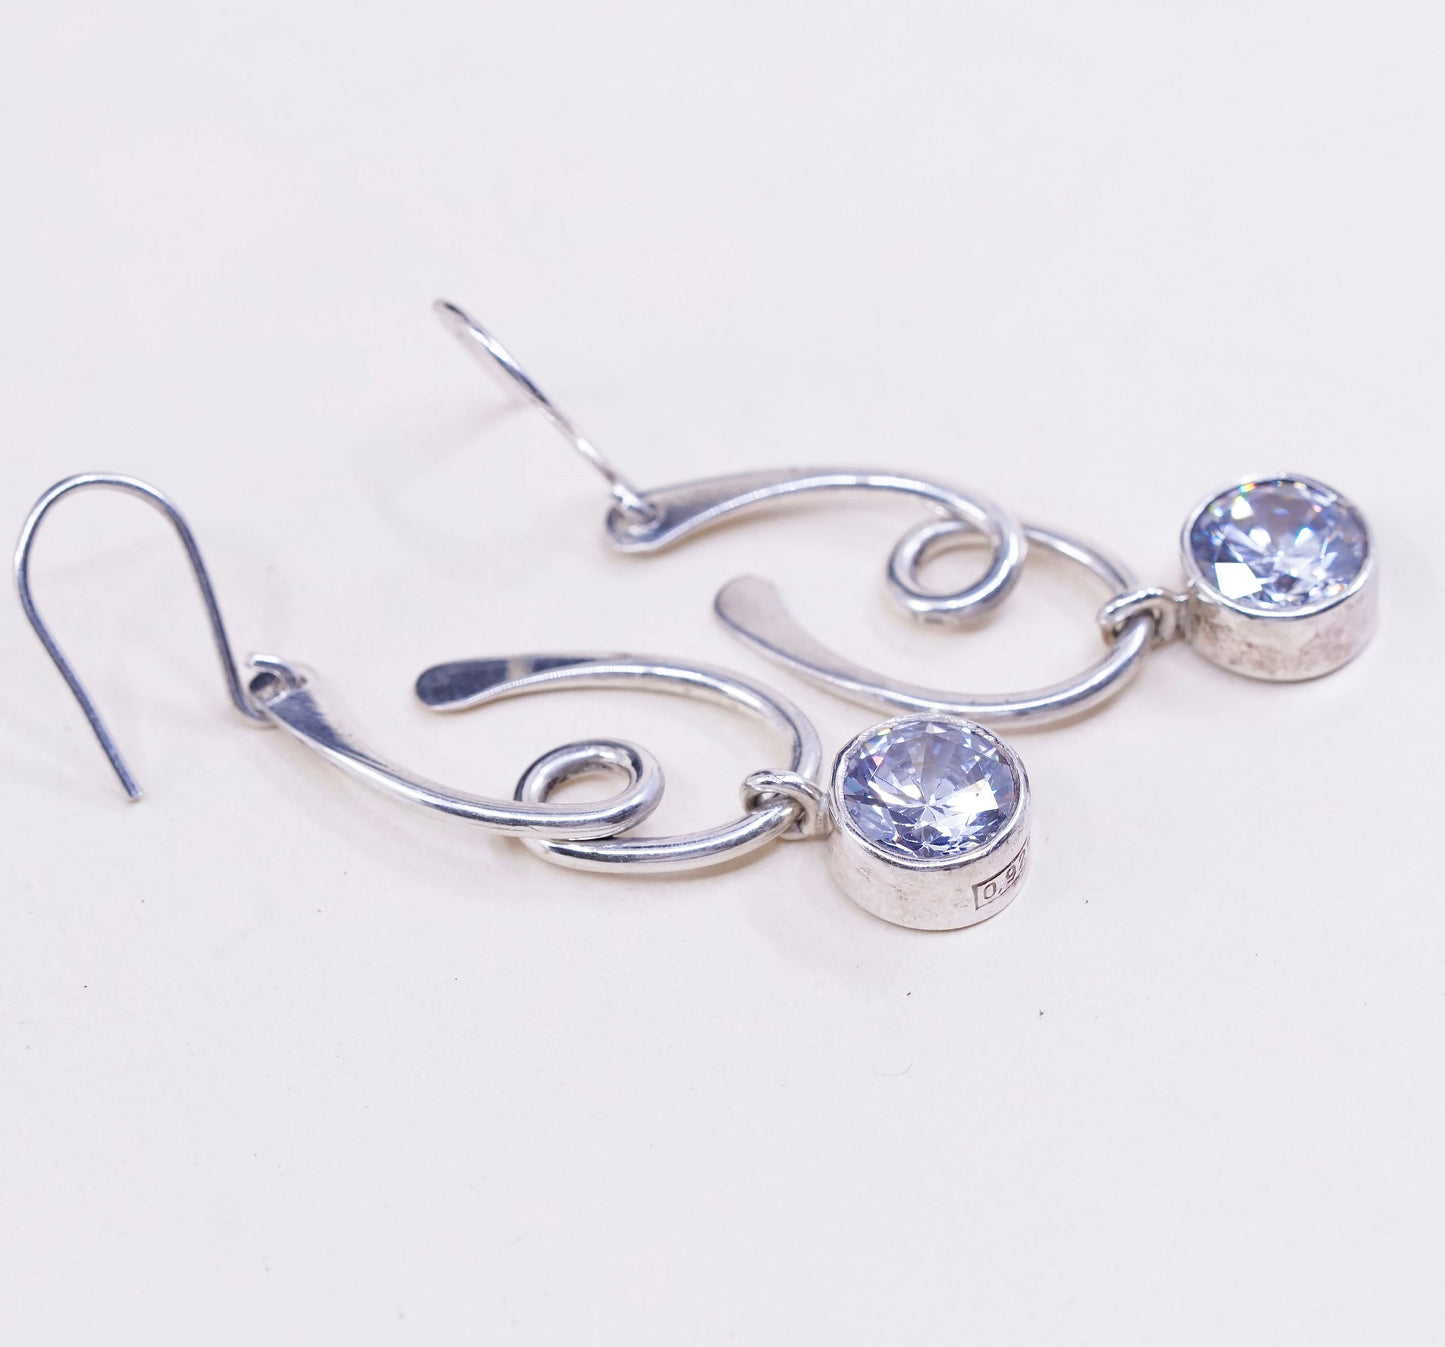 Vintage sterling silver handmade earrings, 925 swirl with round CZ